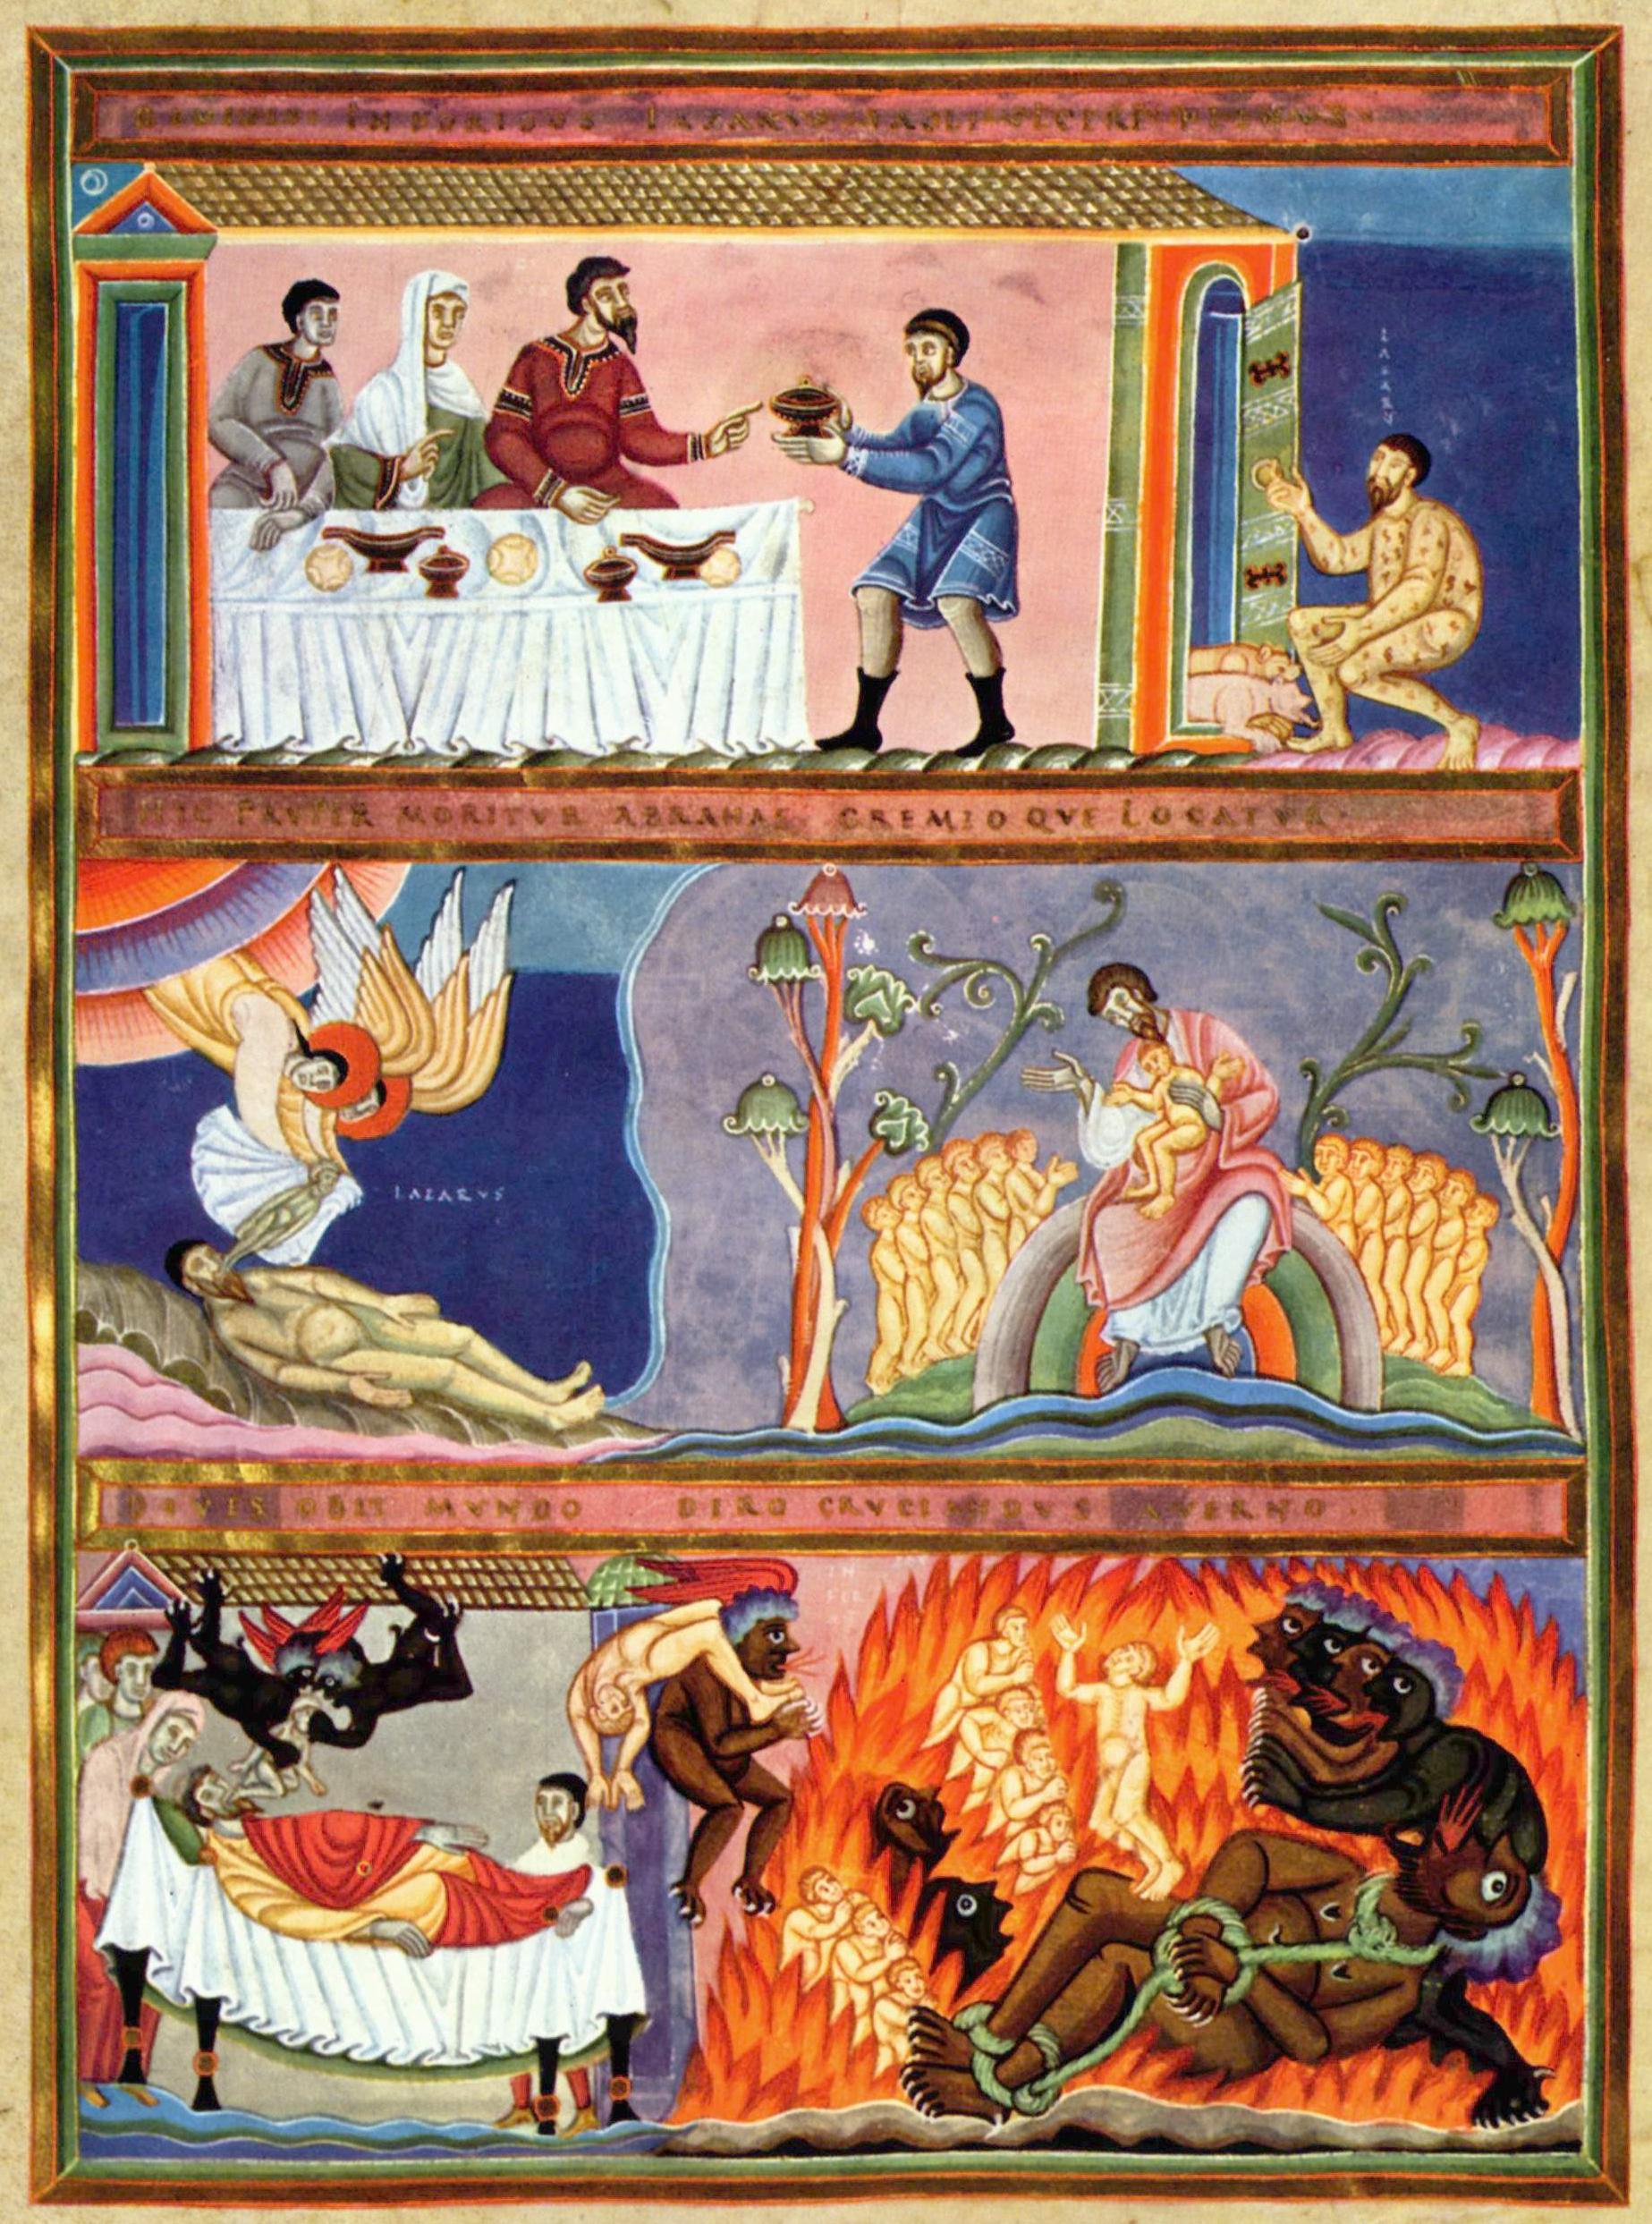 The parable of the Rich Man and Lazarus as illustrated in Codex Aureus Epternacensis. Image courtesy of Wikimedia Commons.